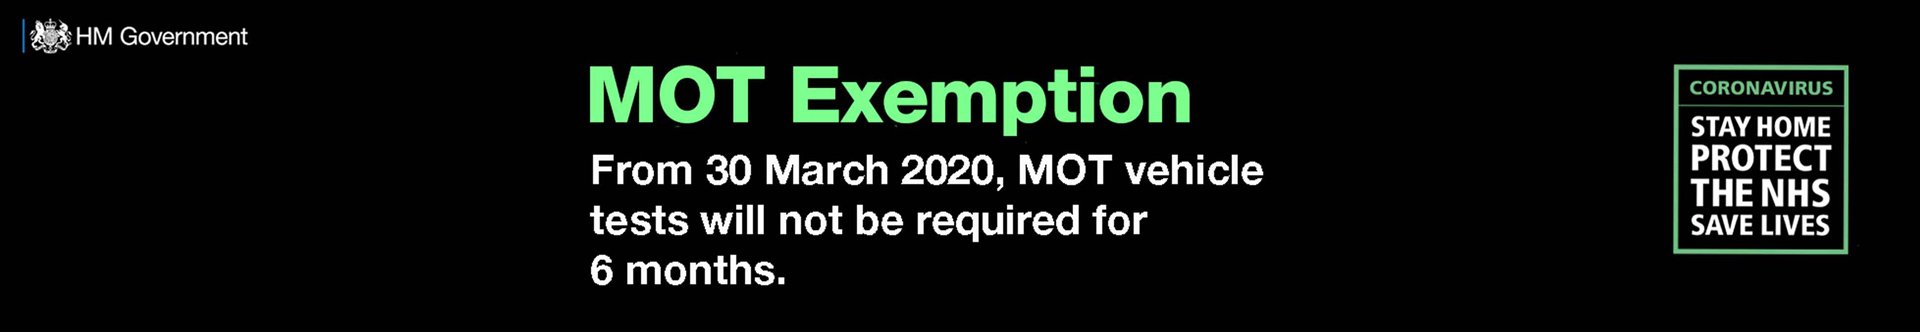 6 Month Exemption from MOT Testing